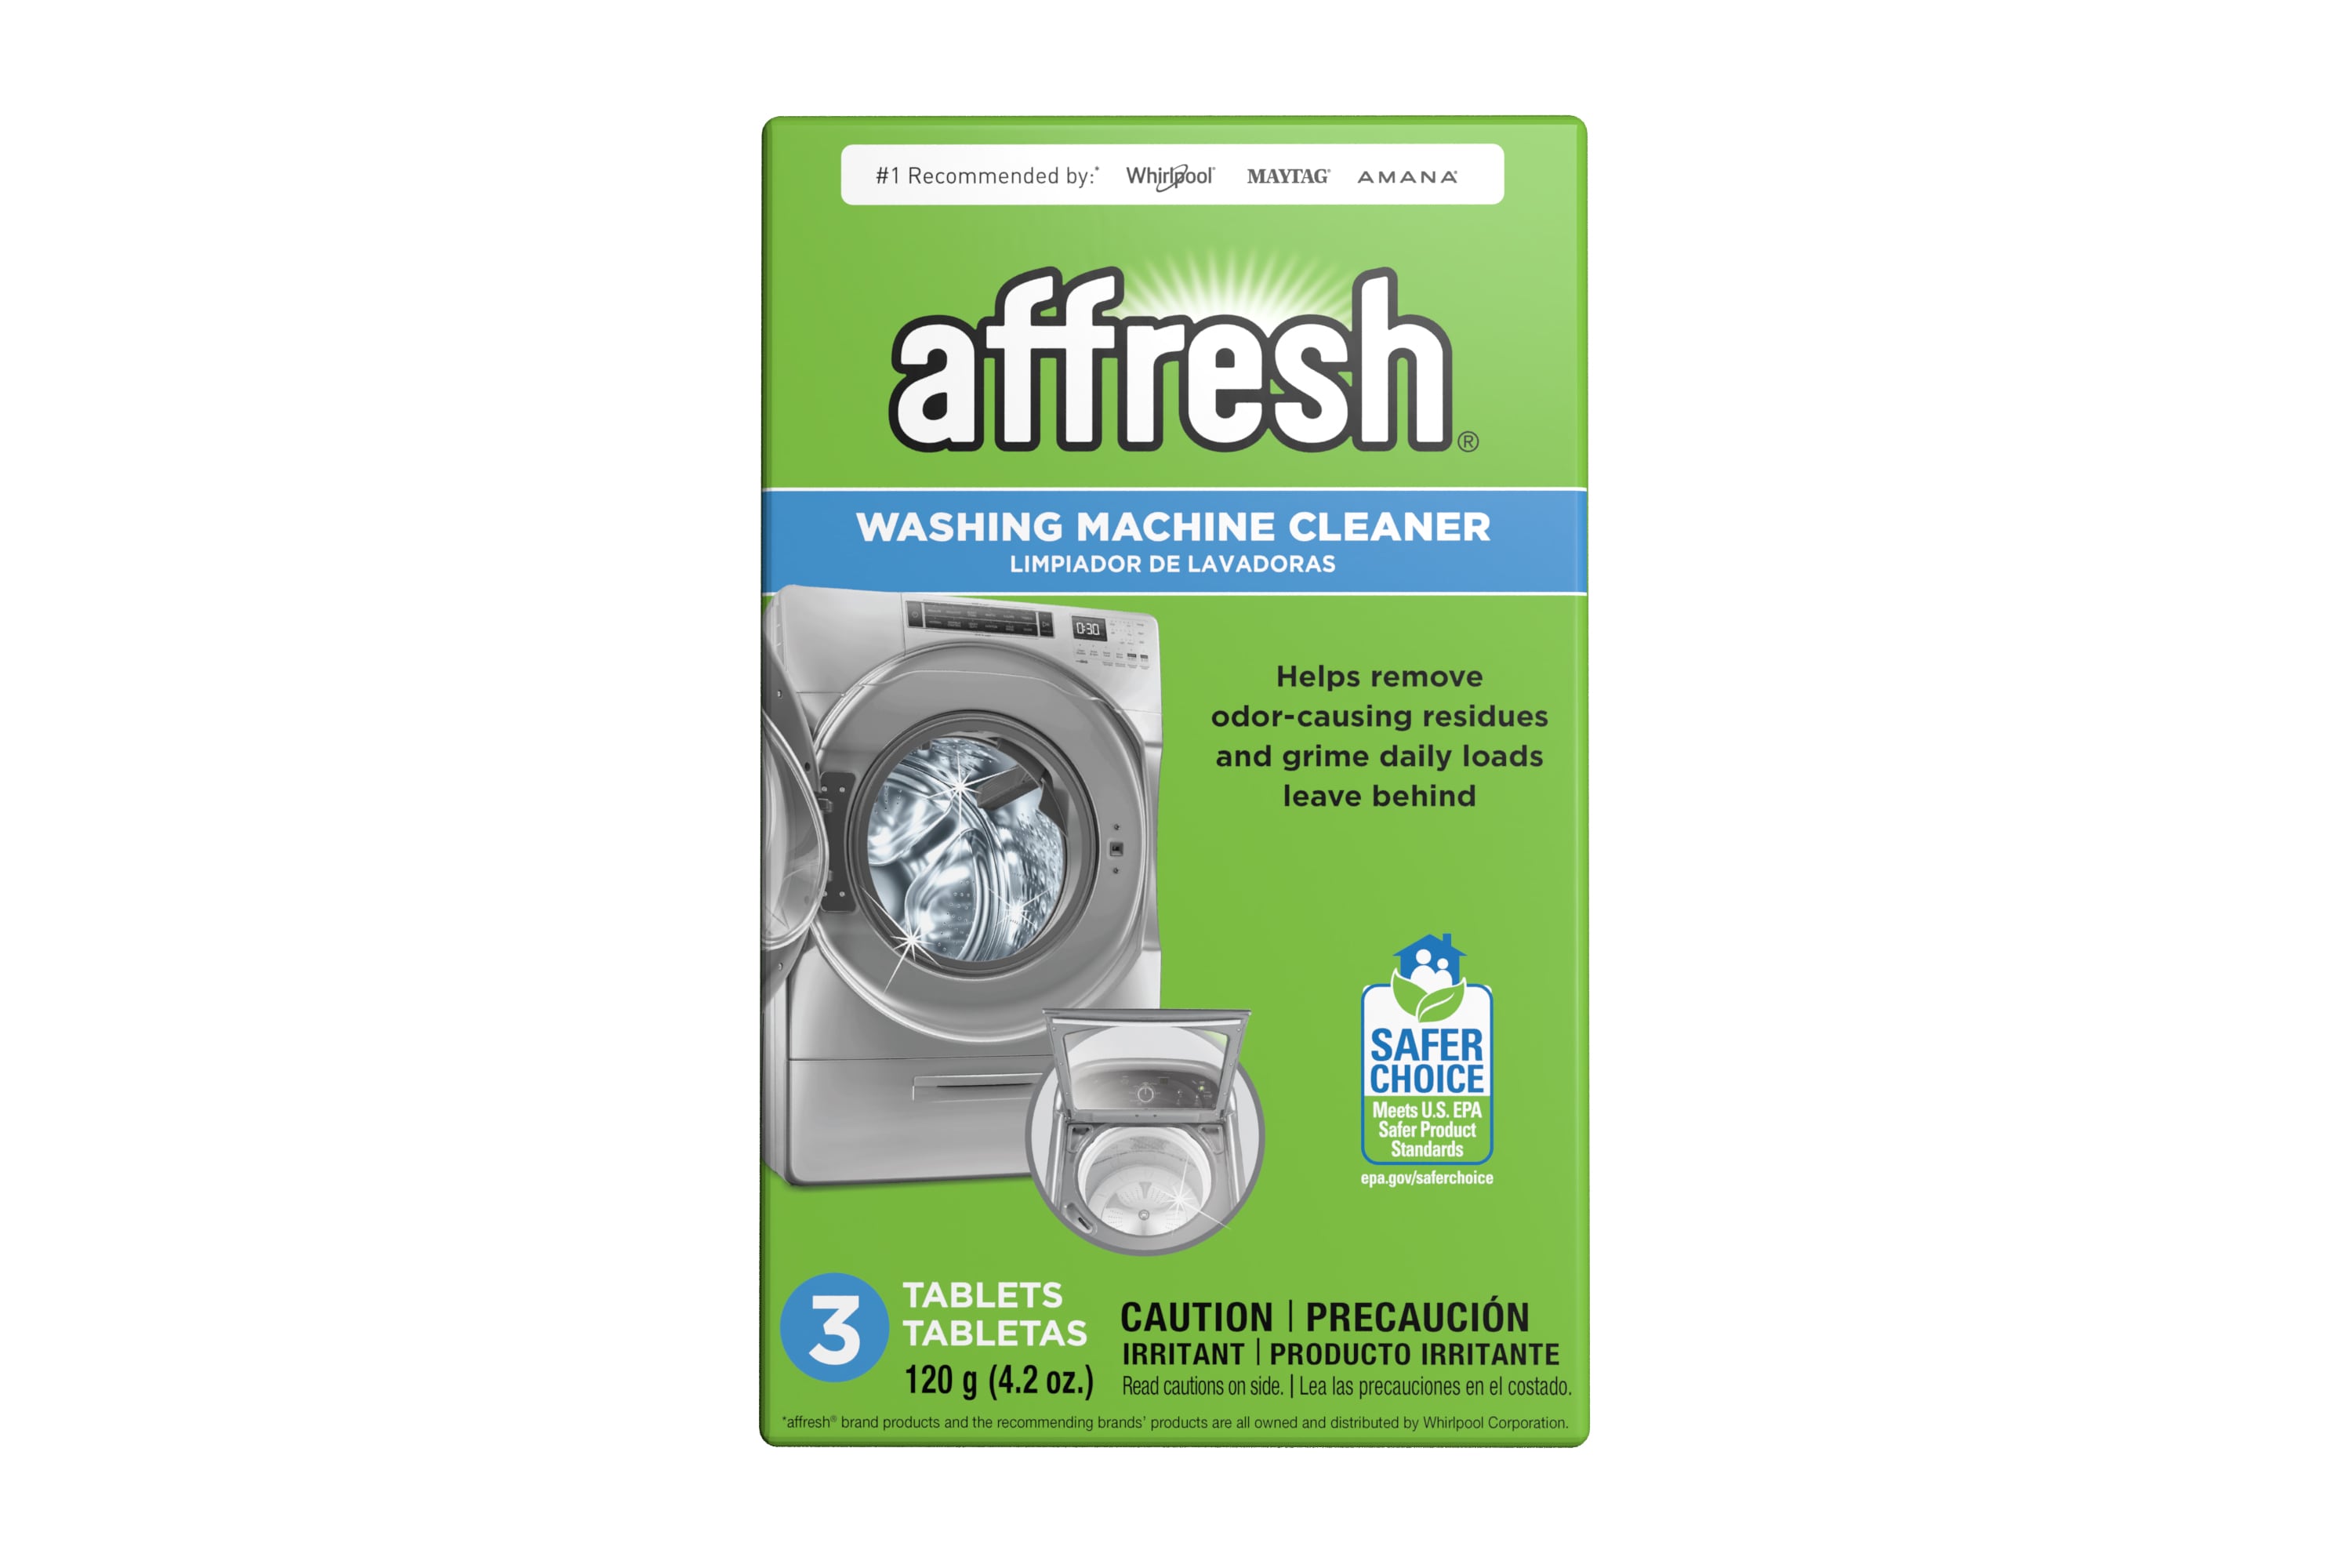 EWG's Guide to Healthy Cleaning  Glisten Washer Magic Machine Cleaner  & Deodorizer Cleaner Rating